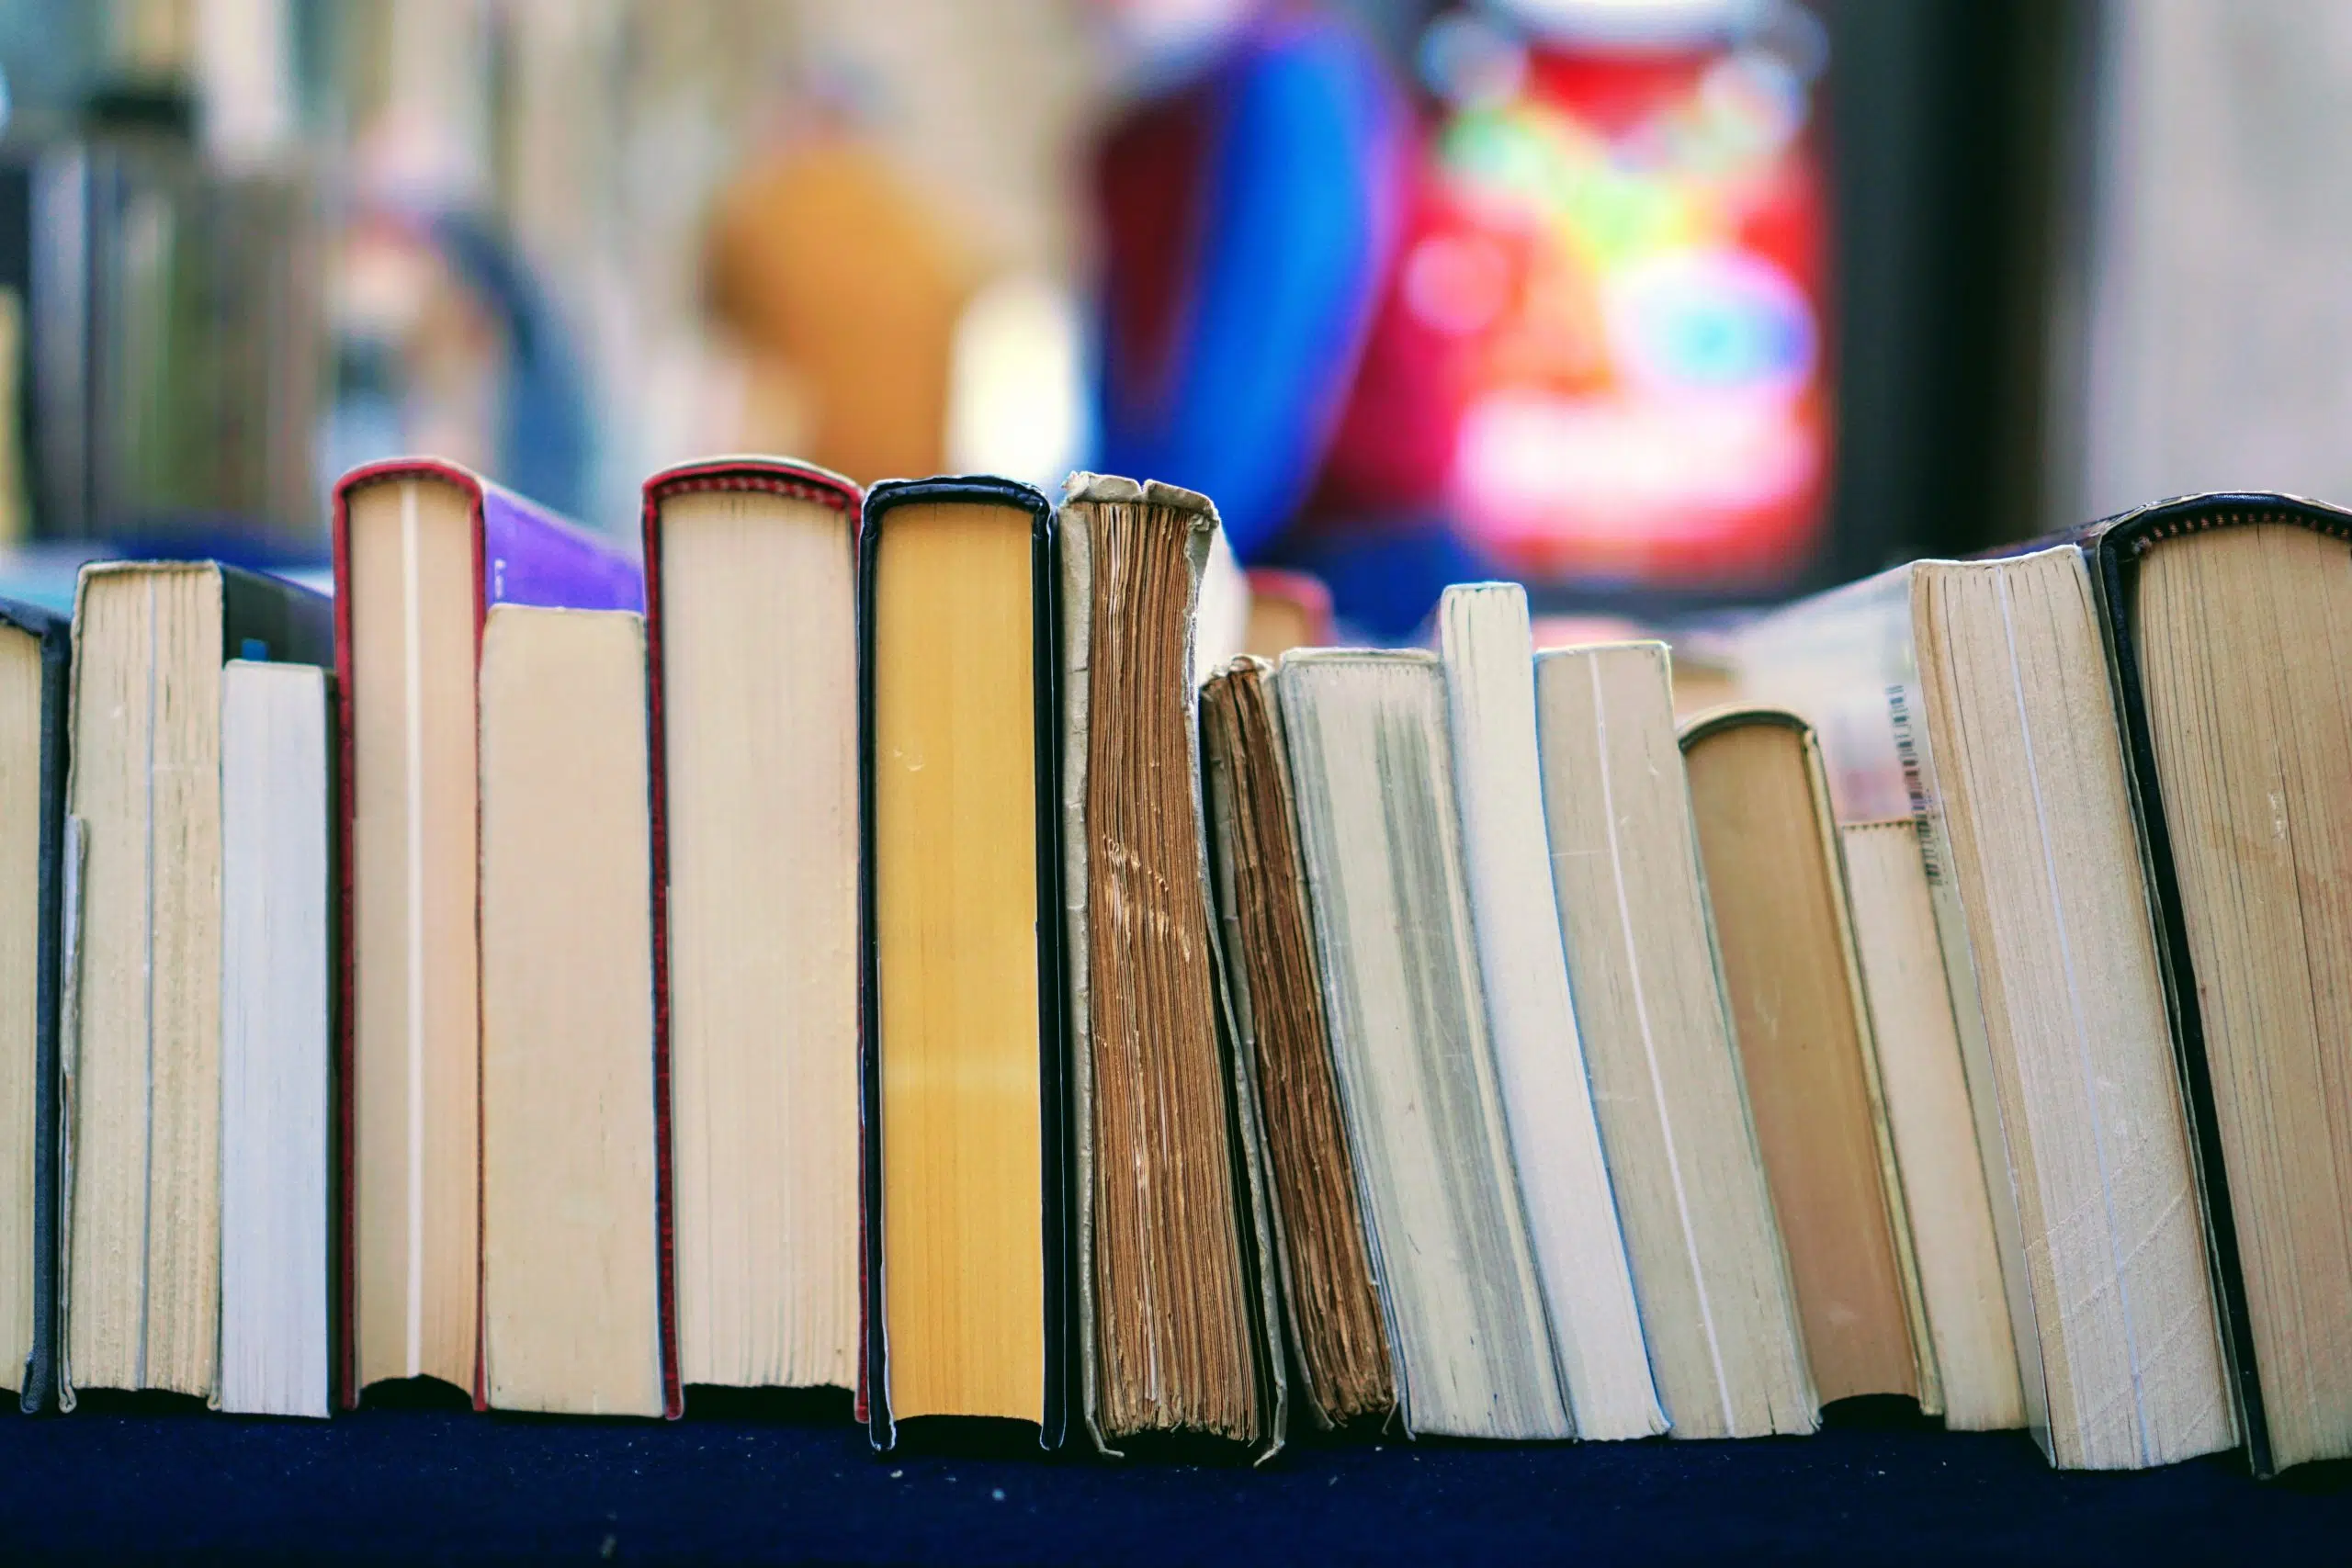 Brown County Library Announces BIG Book Sale